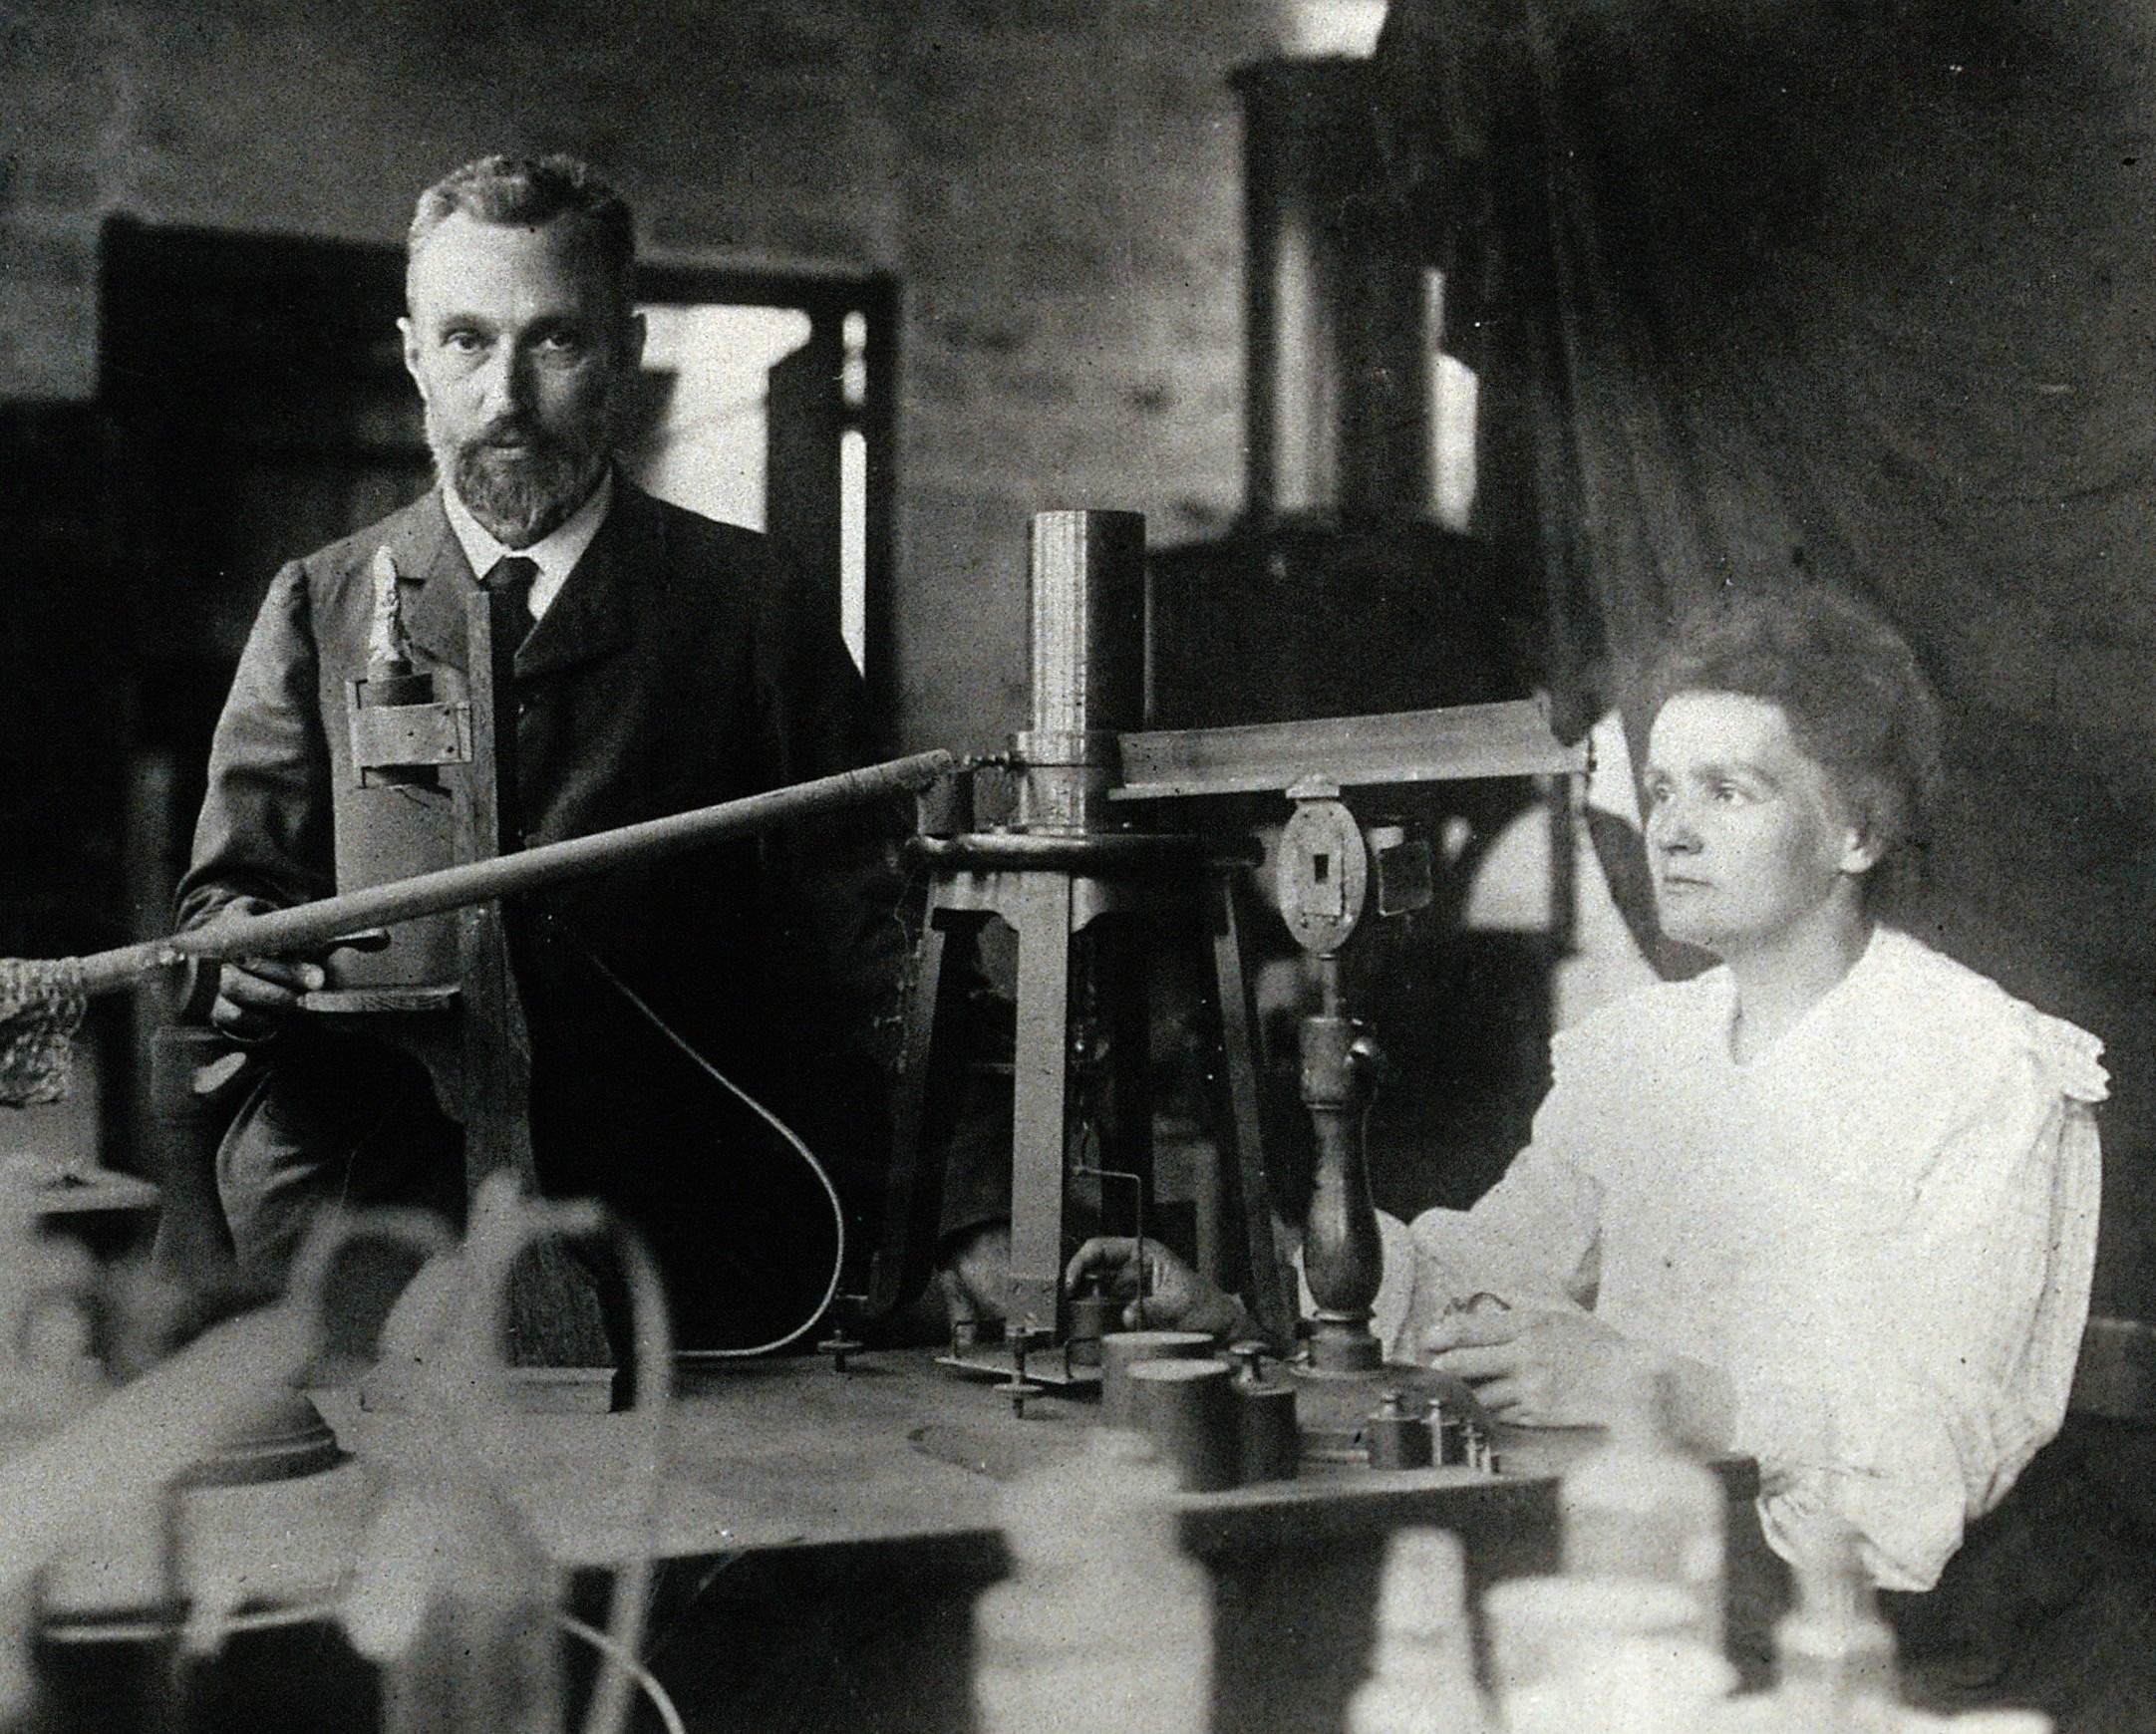 1896 – Pierre and Marie Curie Identify ‘Radioactivity’